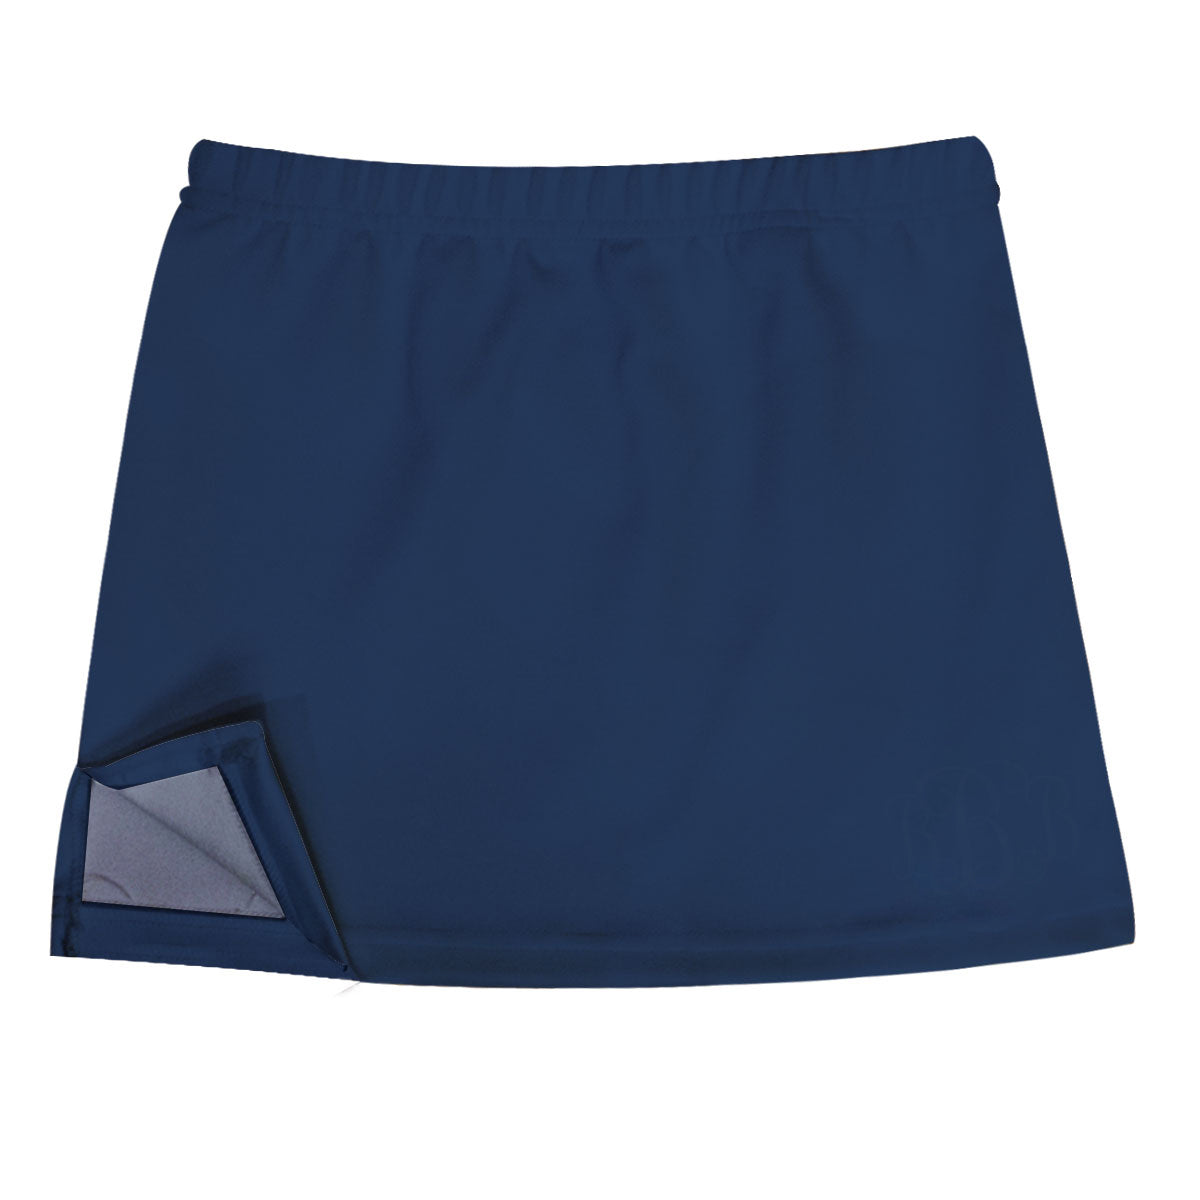 Monogram Navy Skirt With Side Vents - Wimziy&Co.